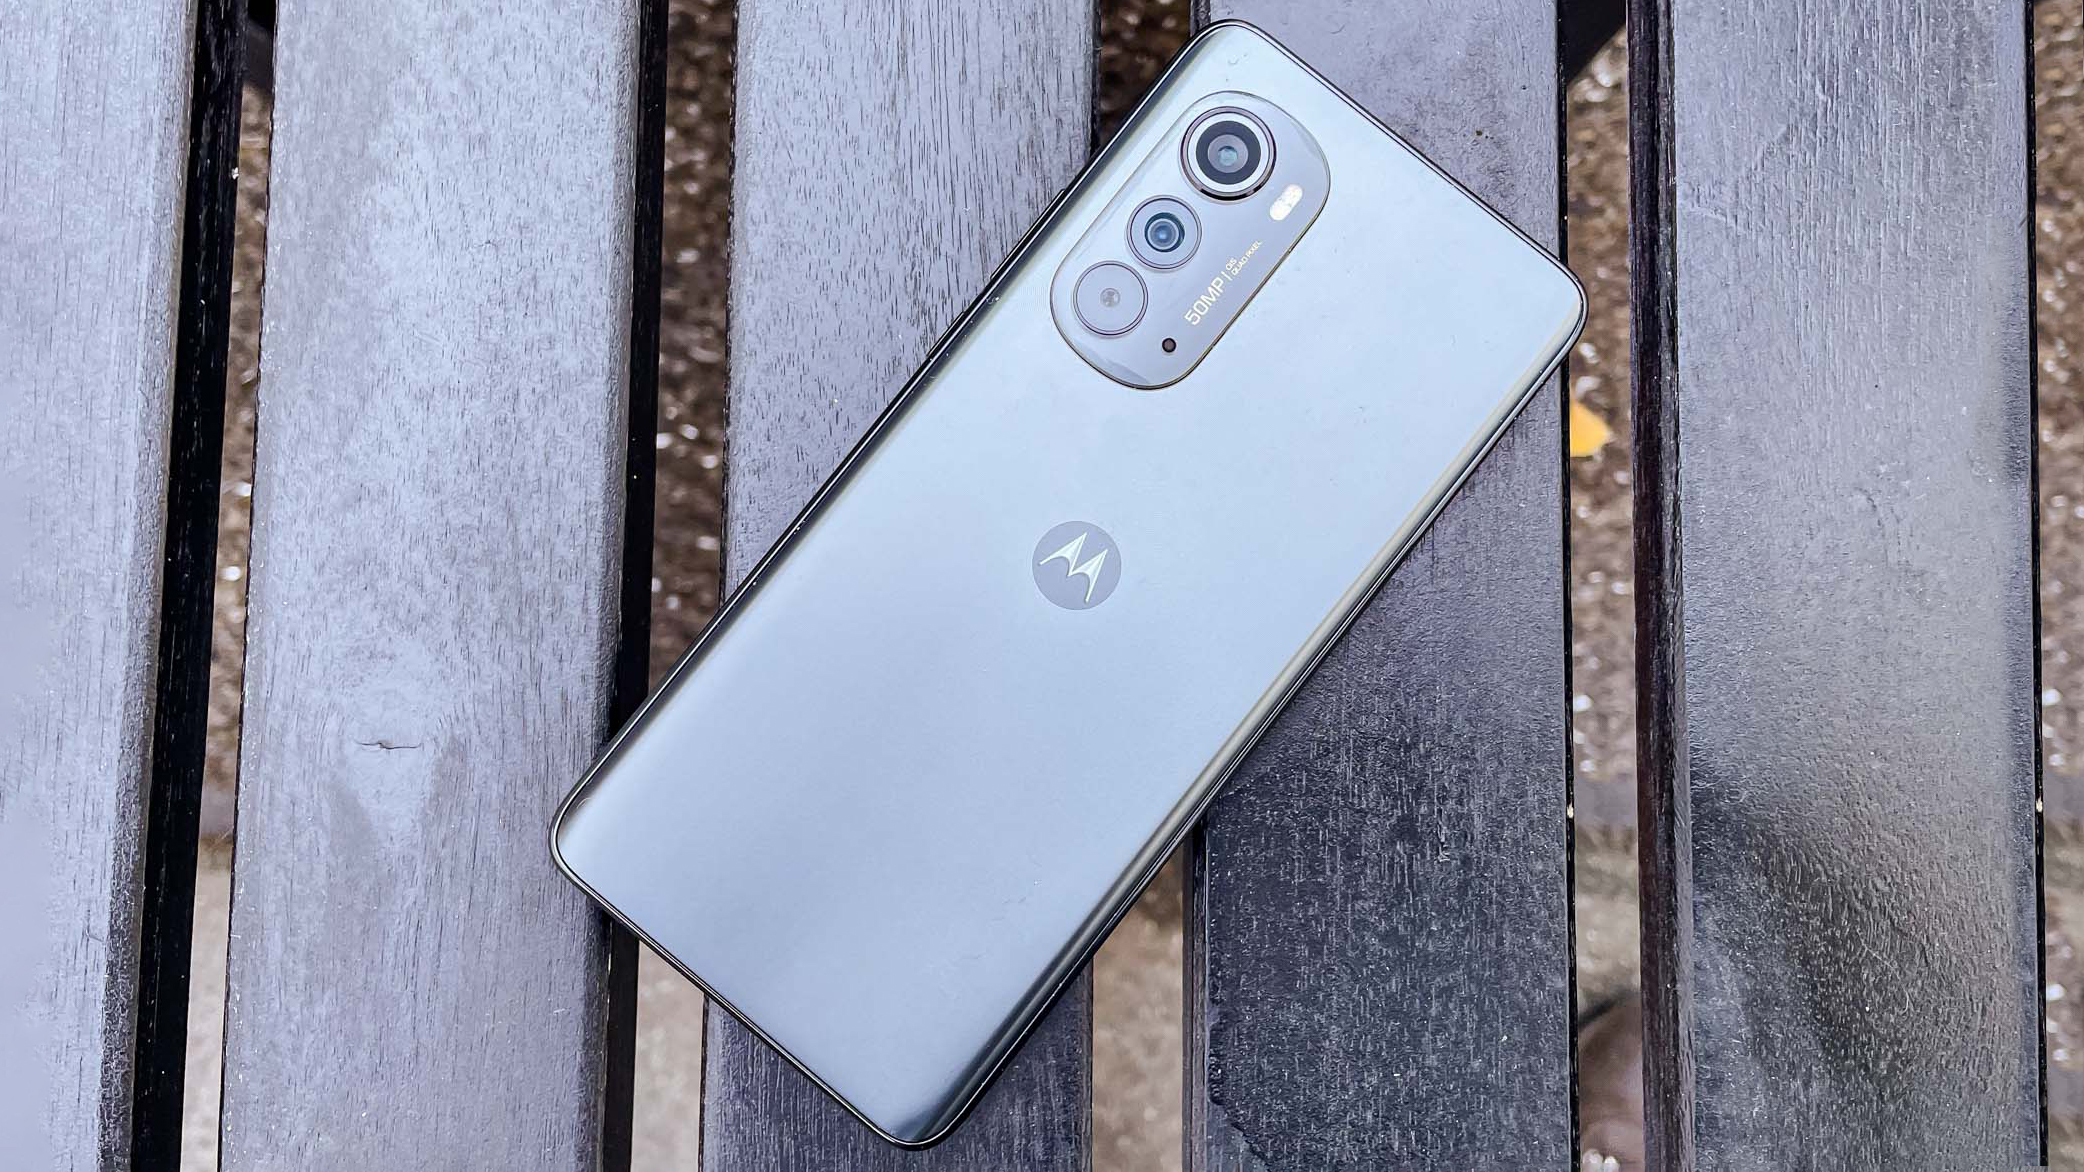 The New Motorola Edge 30 Pro Lets You Take Selfies And Video Like A Pro